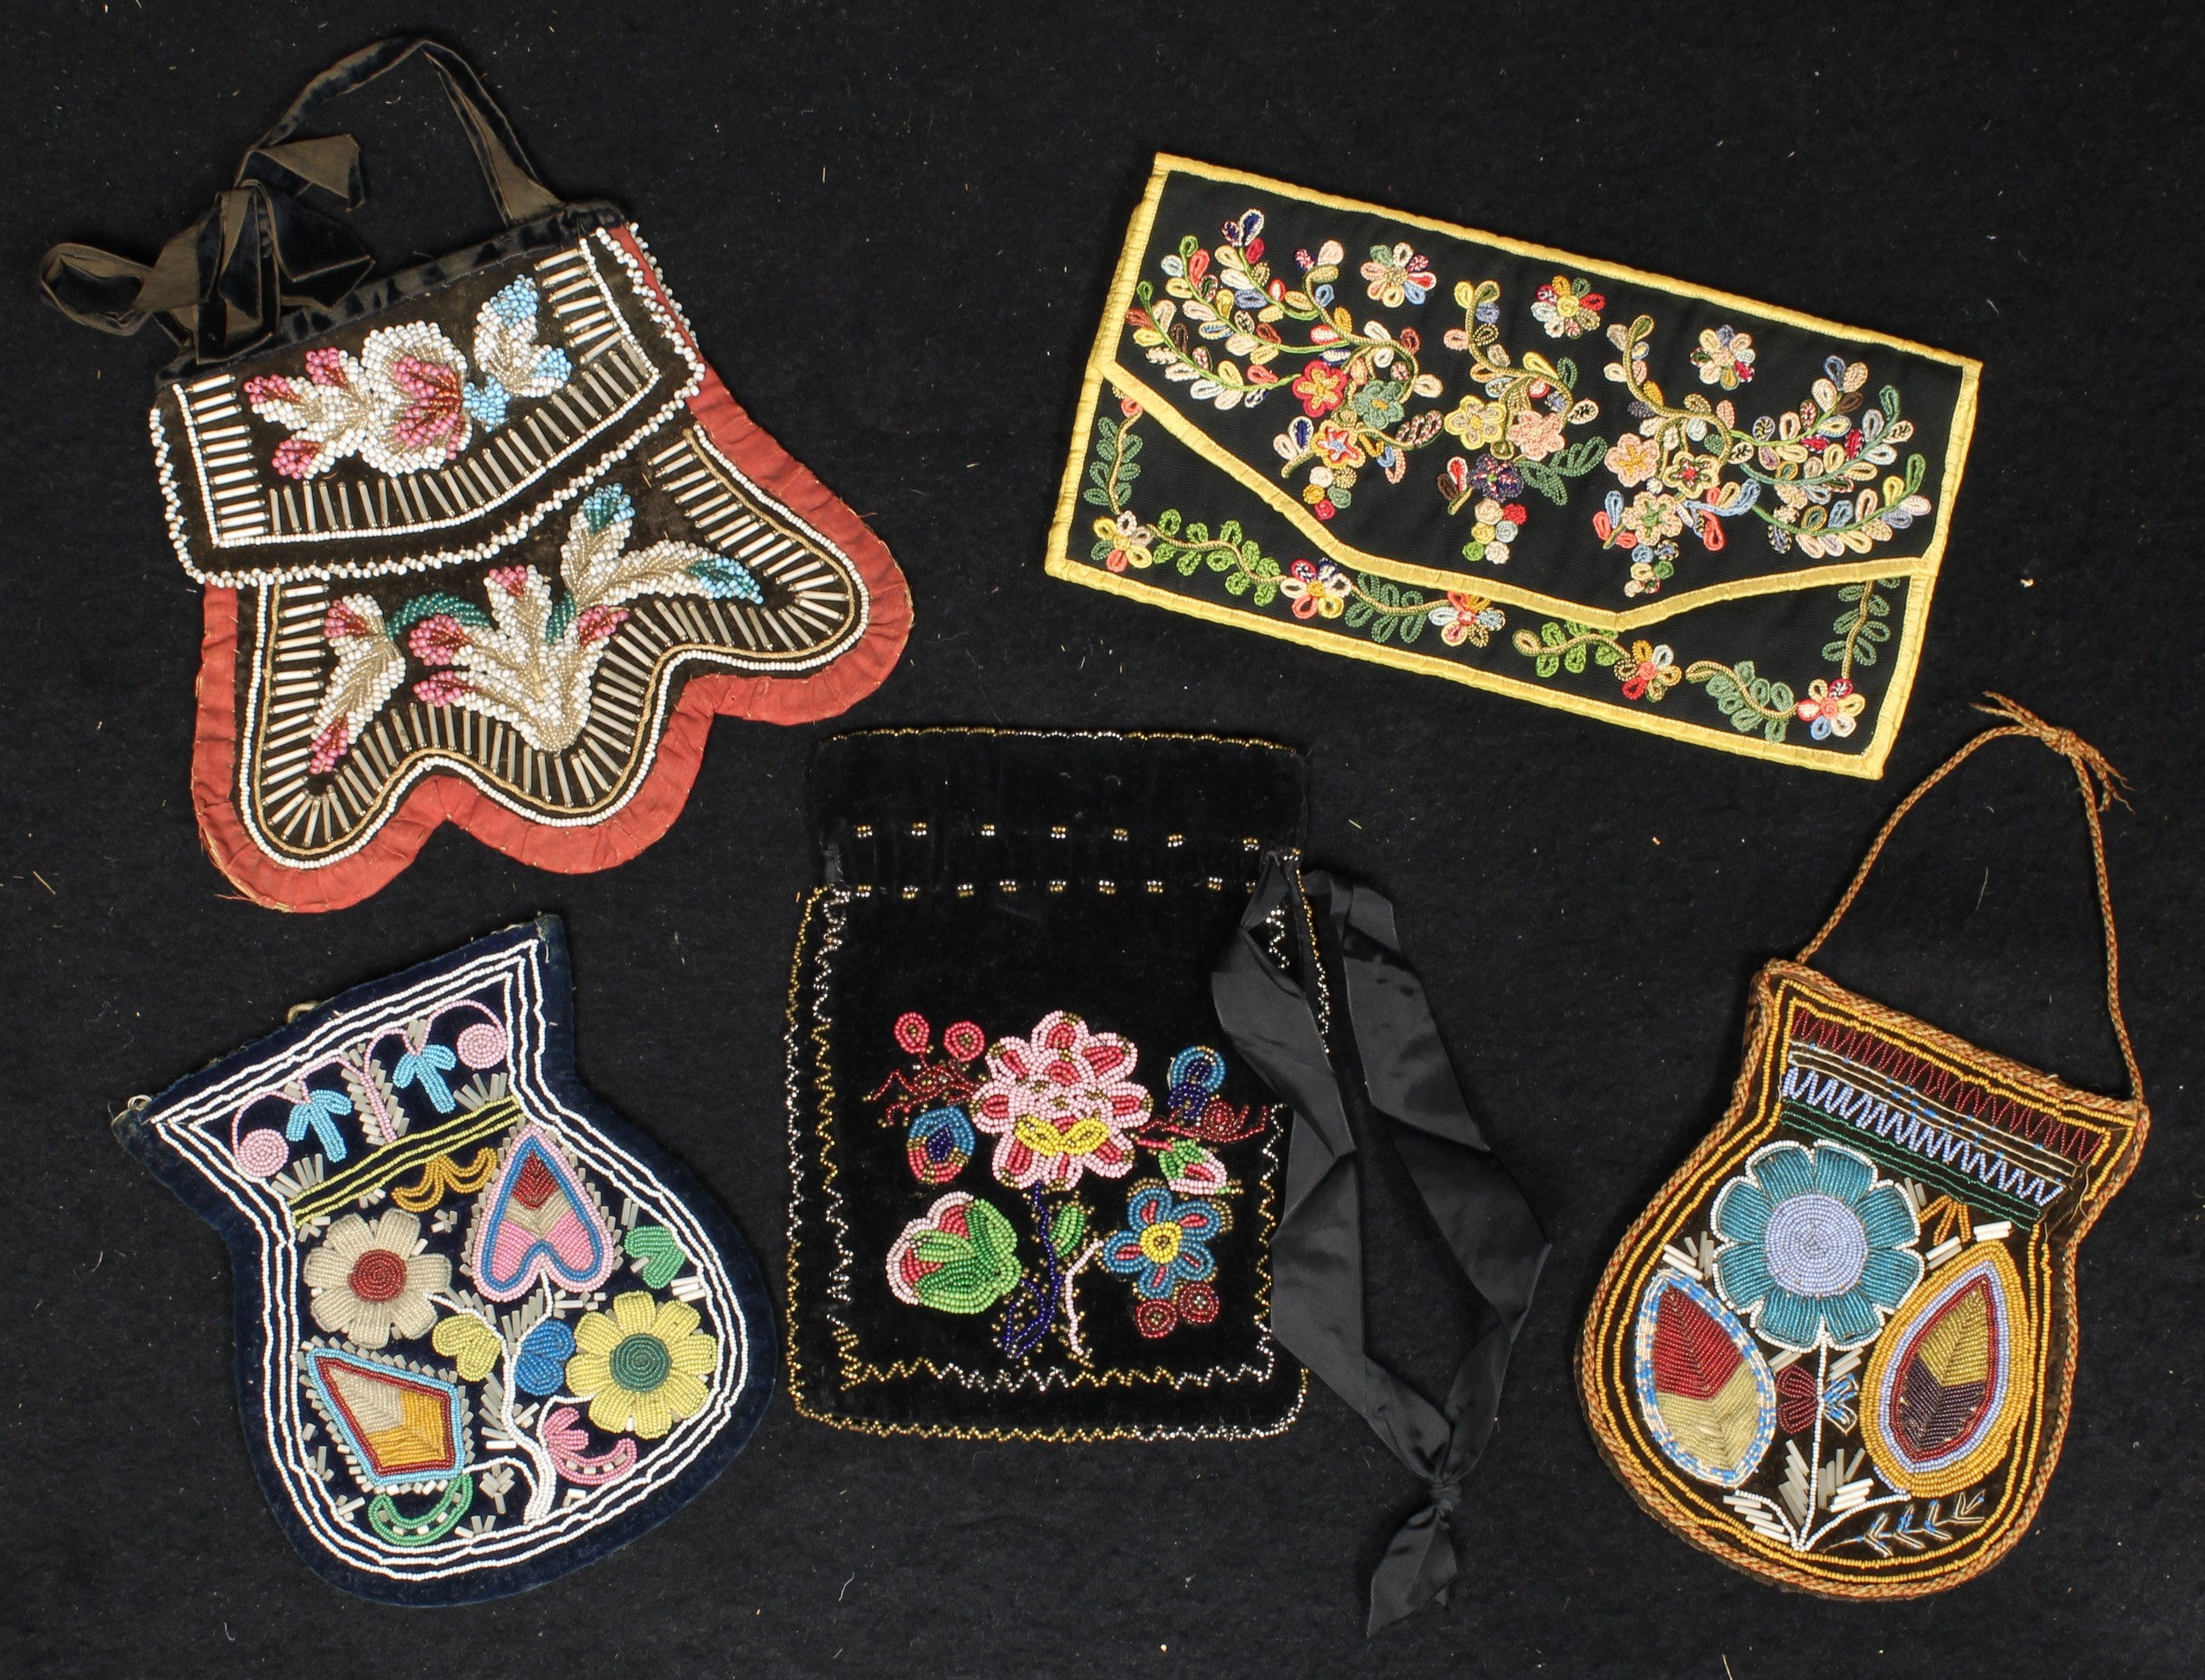 A 19th century beadwork purse, possibly Native America, brightly decorated with stylized flowers and